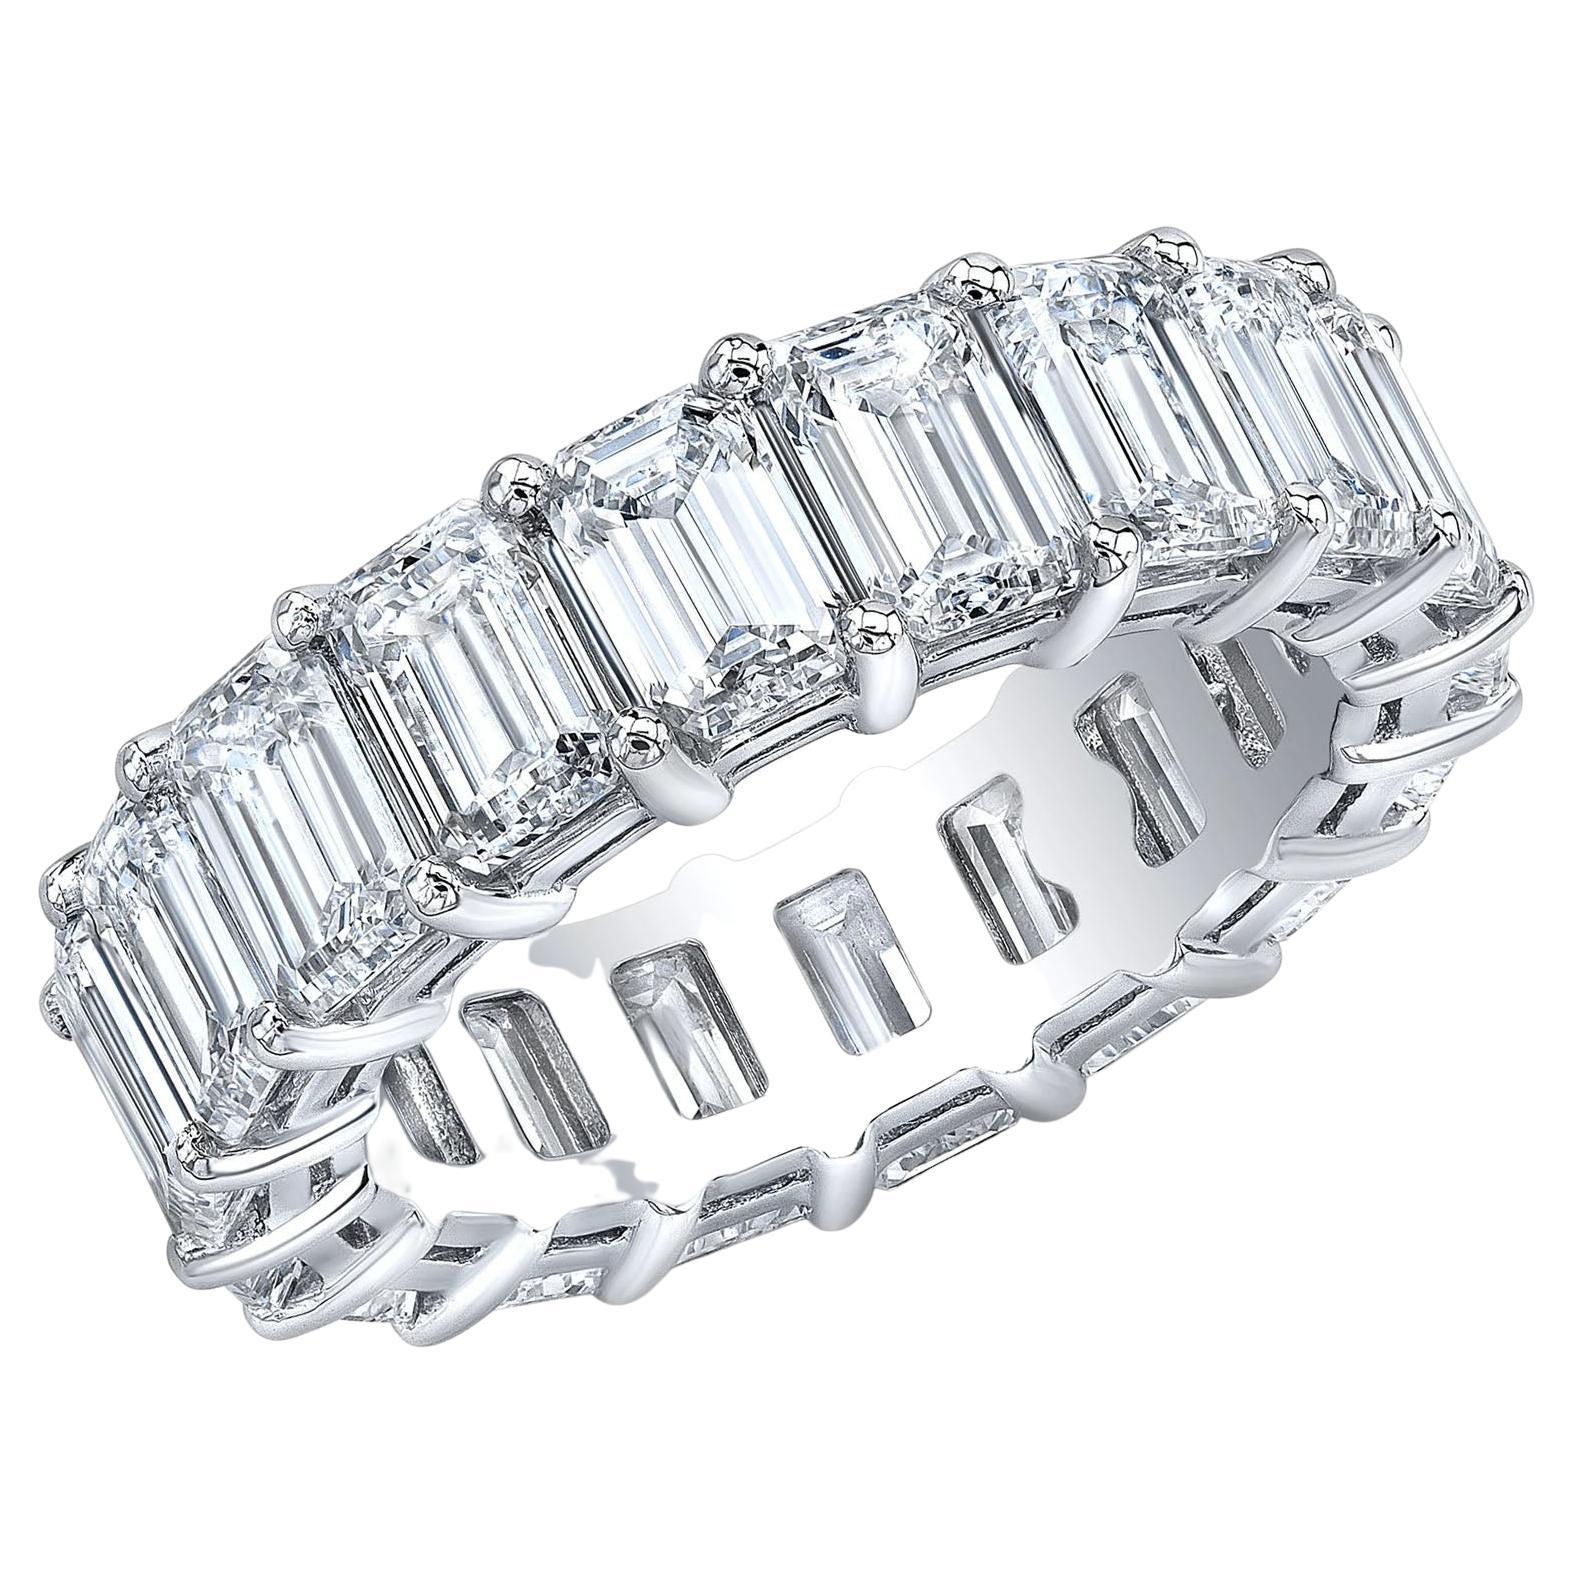 For Sale:  4 Carats Emerald Cut Eternity Band Shared Prong Style F-G Color VS1 Clarity 14k